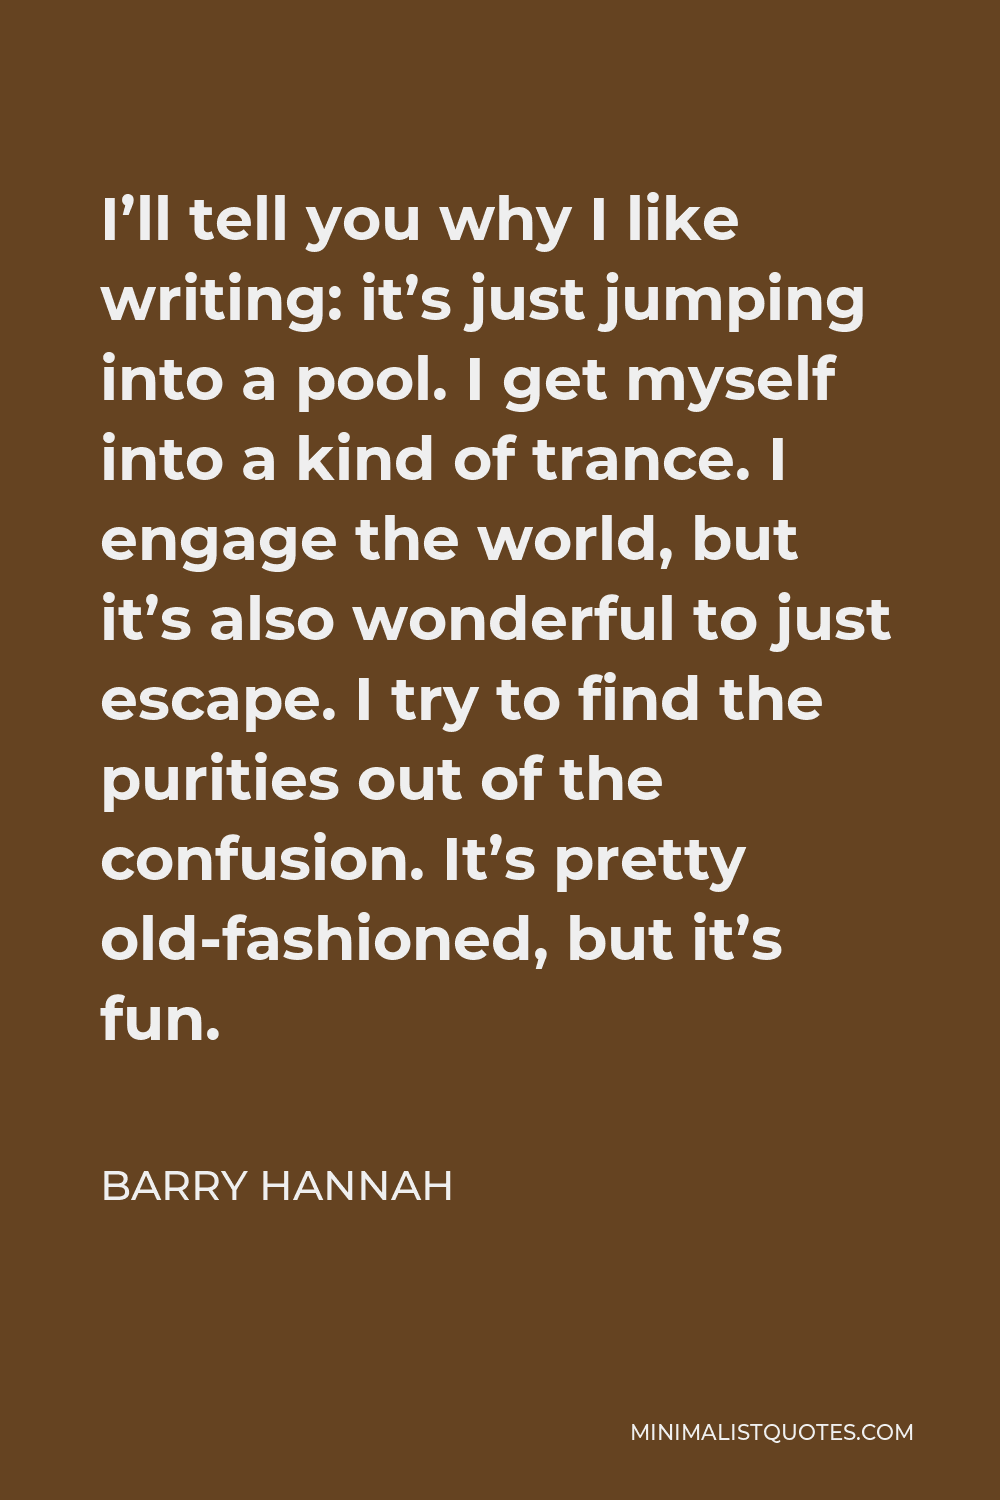 Barry Hannah Quote - I’ll tell you why I like writing: it’s just jumping into a pool. I get myself into a kind of trance. I engage the world, but it’s also wonderful to just escape. I try to find the purities out of the confusion. It’s pretty old-fashioned, but it’s fun.